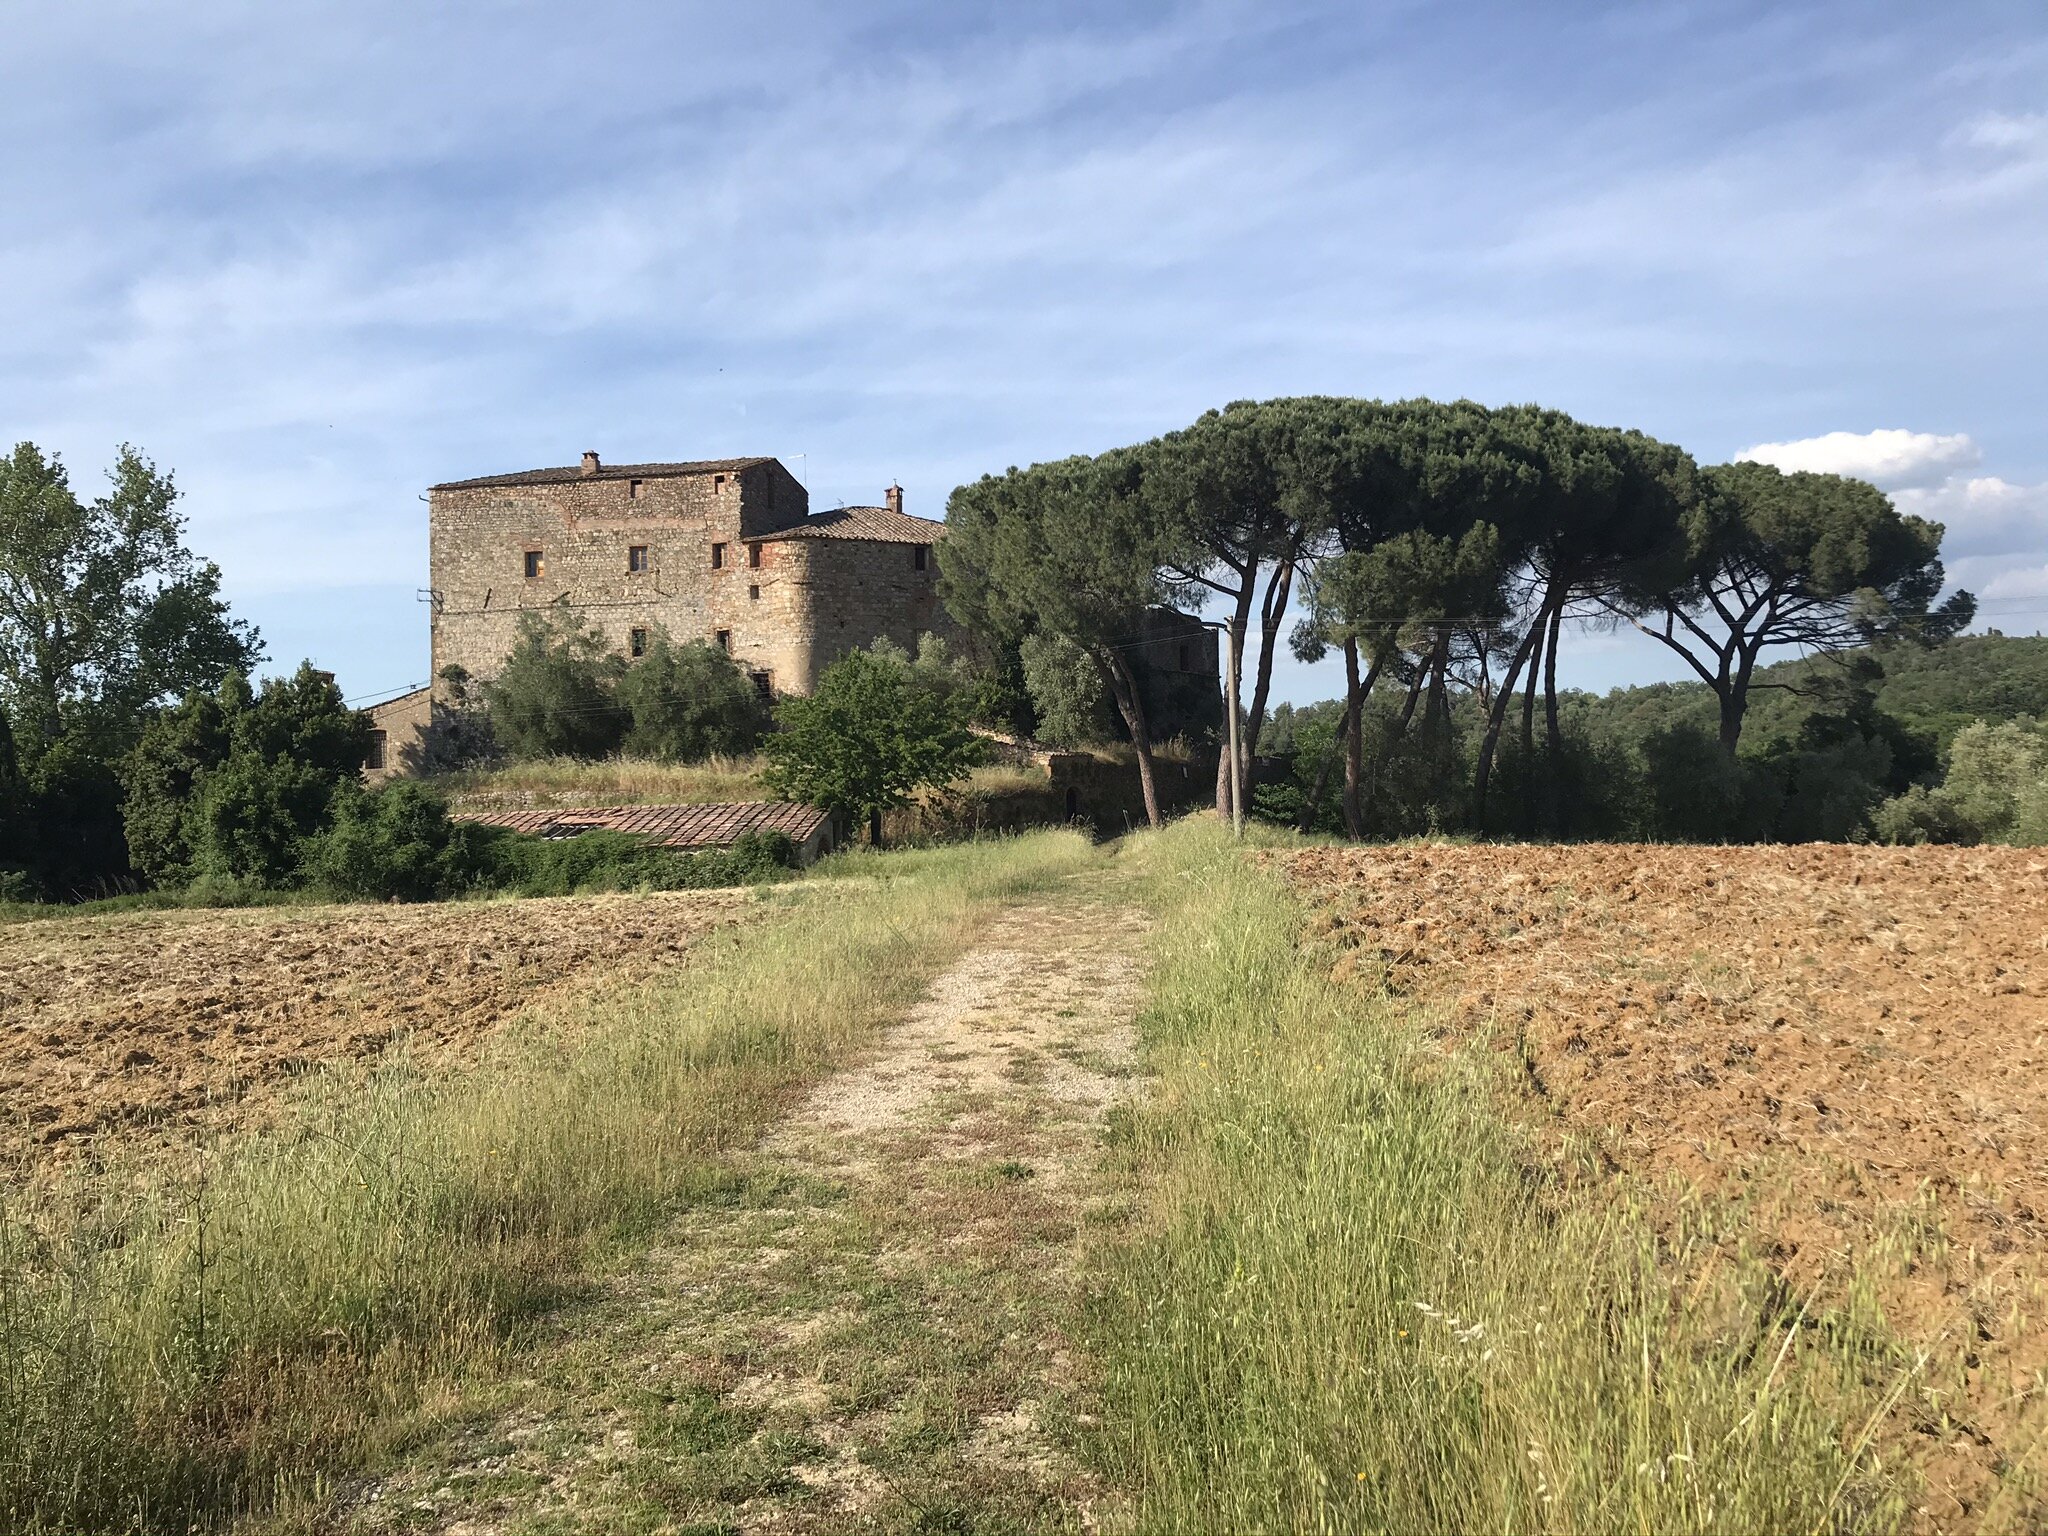  MONTERIGGIONI, Siena, Italy. June 3rd, 2021. PICTURED: A castle first built during the wars between Florence and Siena sits abandoned on a hillside. 